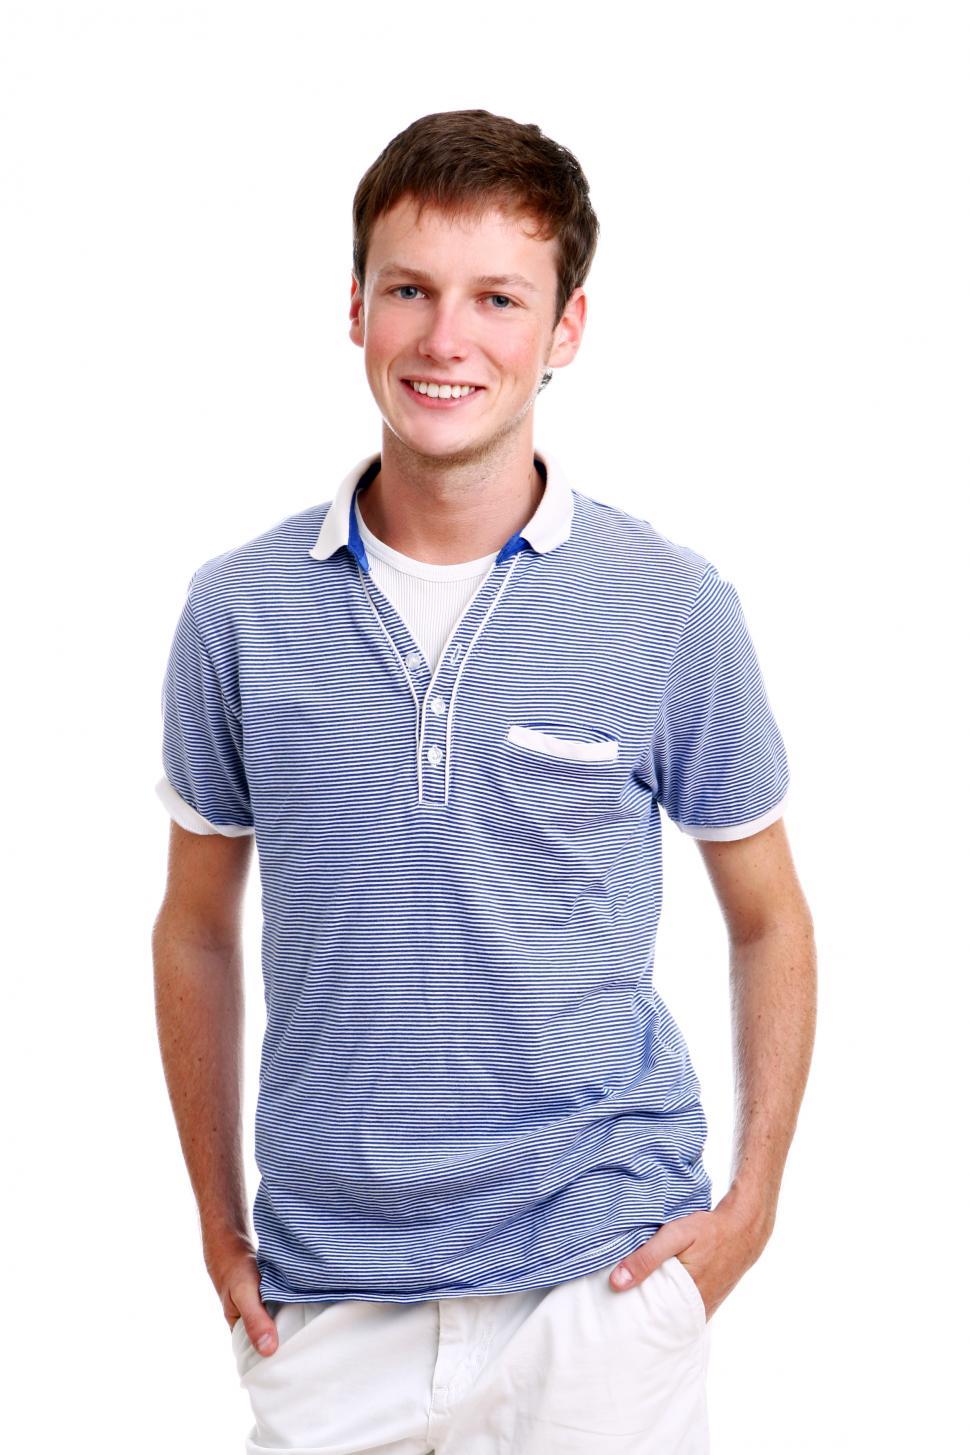 Free Image of young boy with hands in pockets 